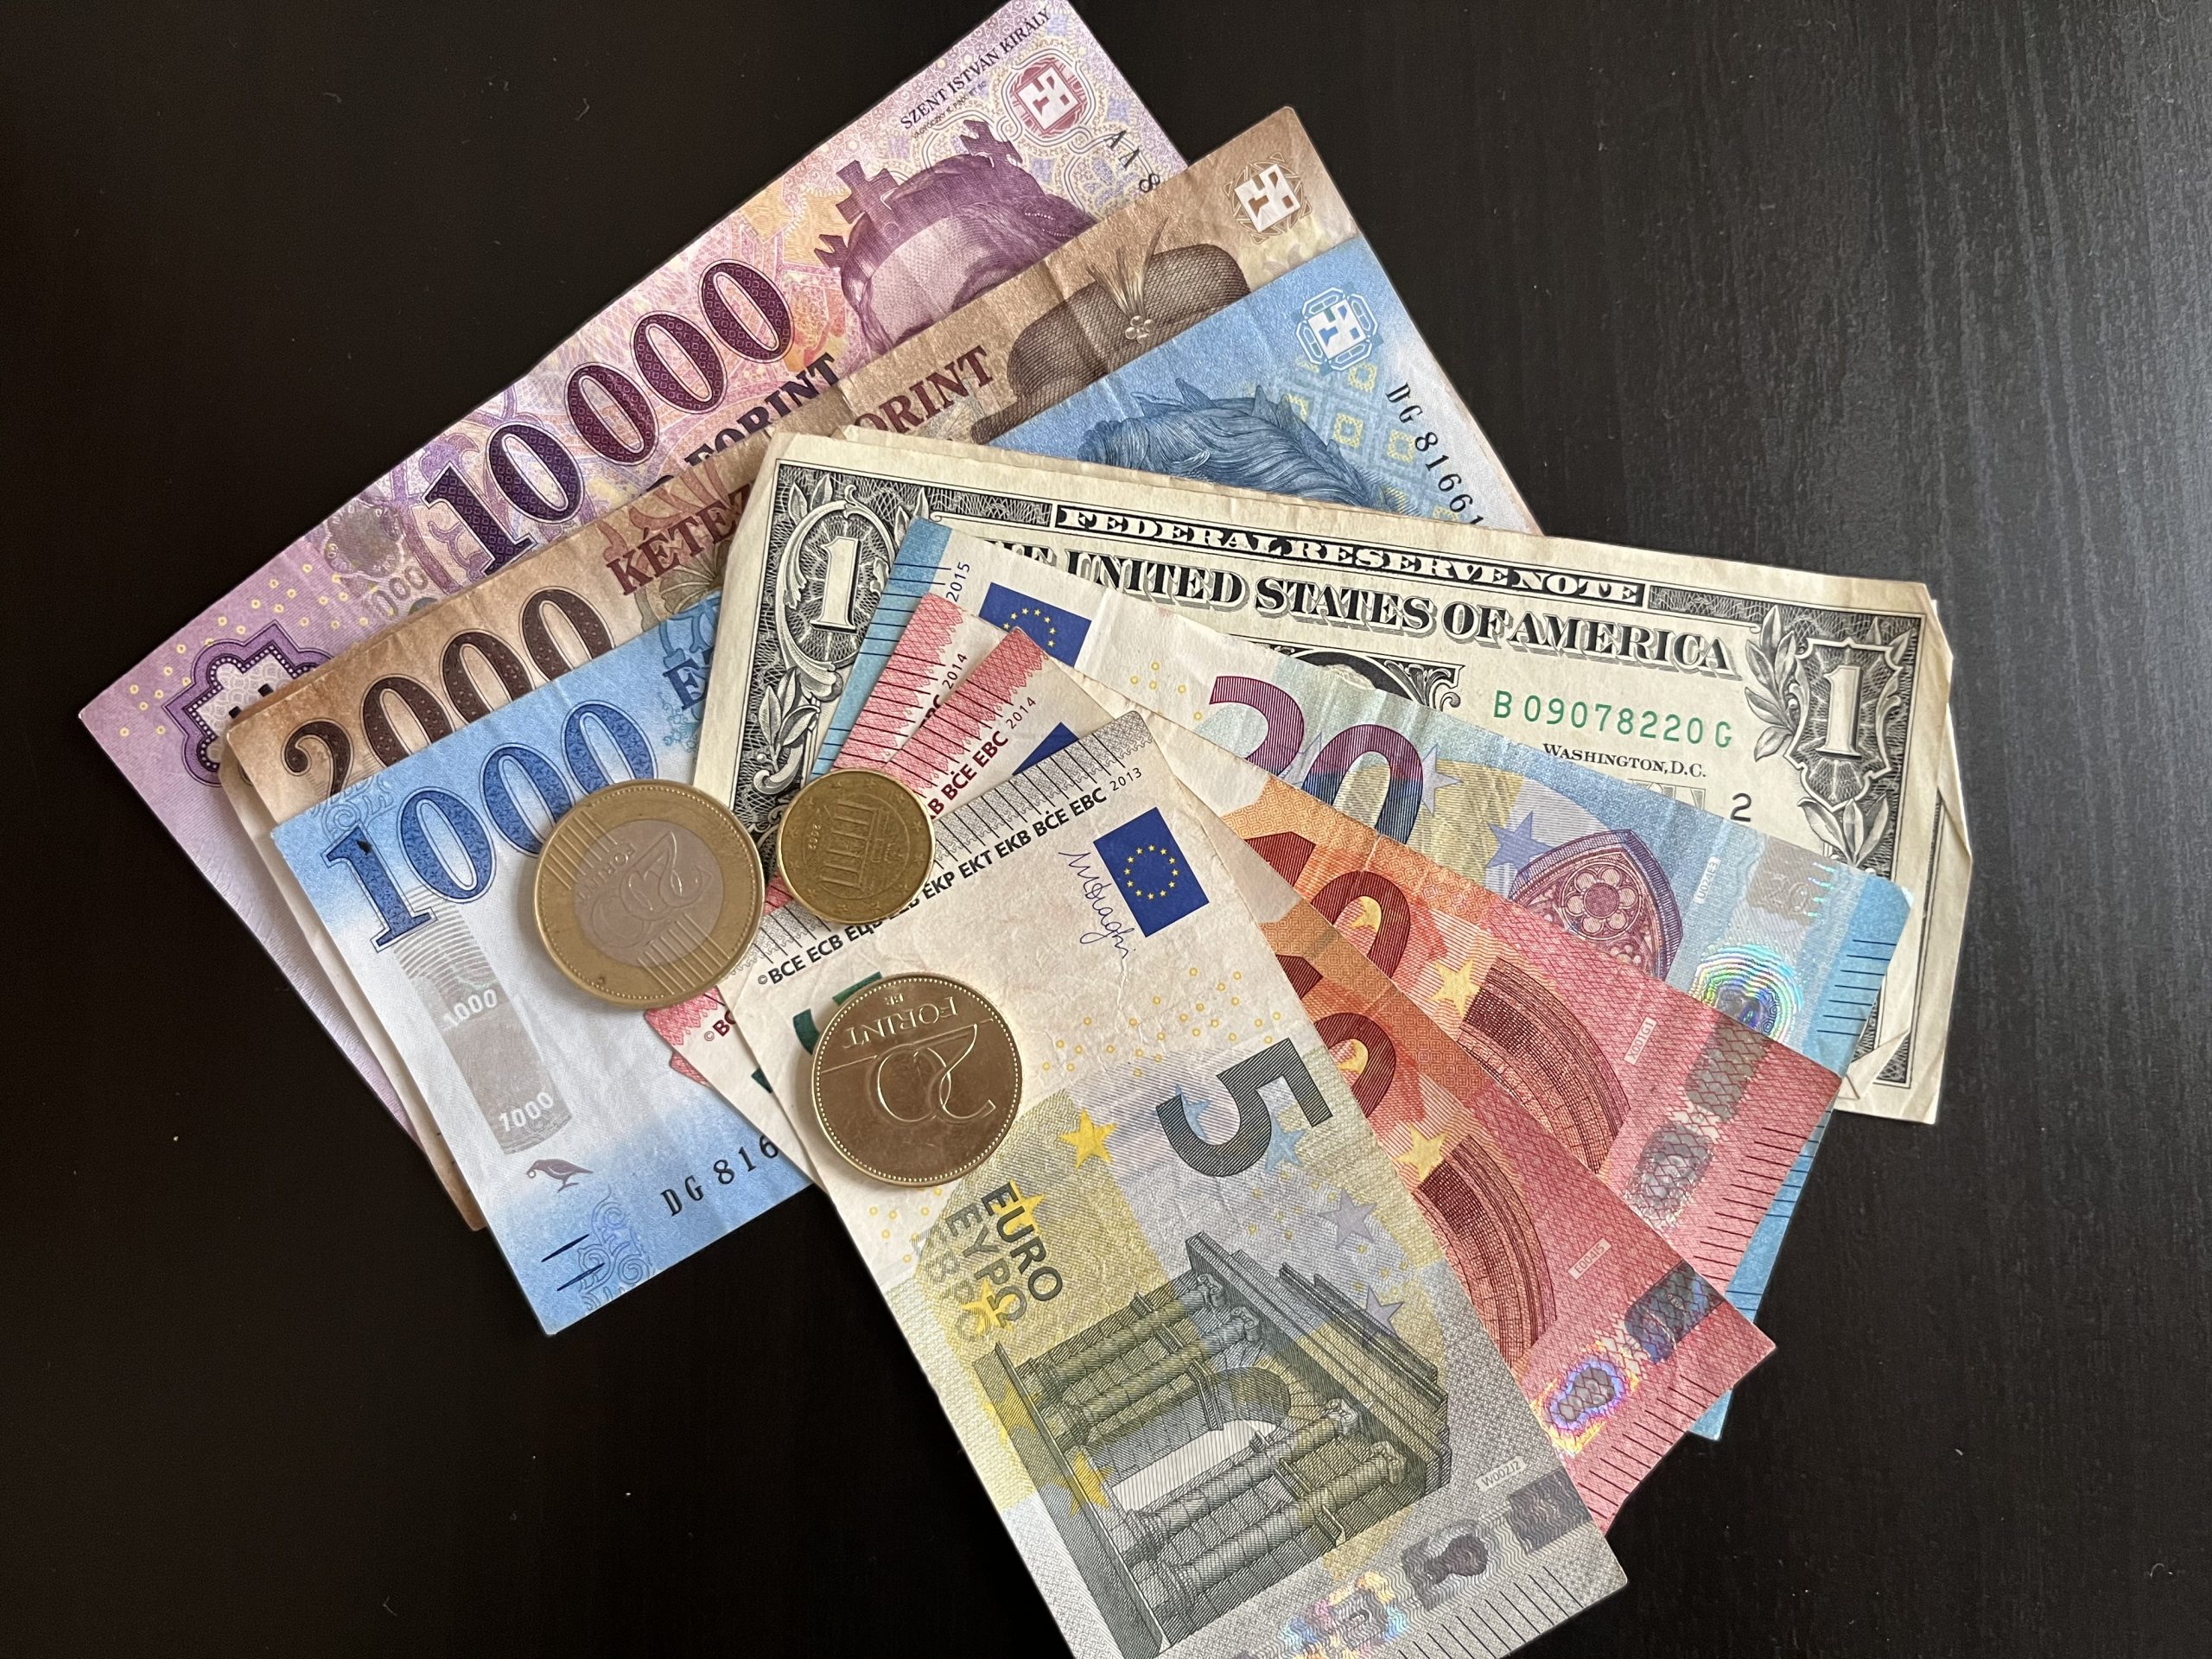 Why is the Devaluation of Hungary's Forint Highest in CEE Region?